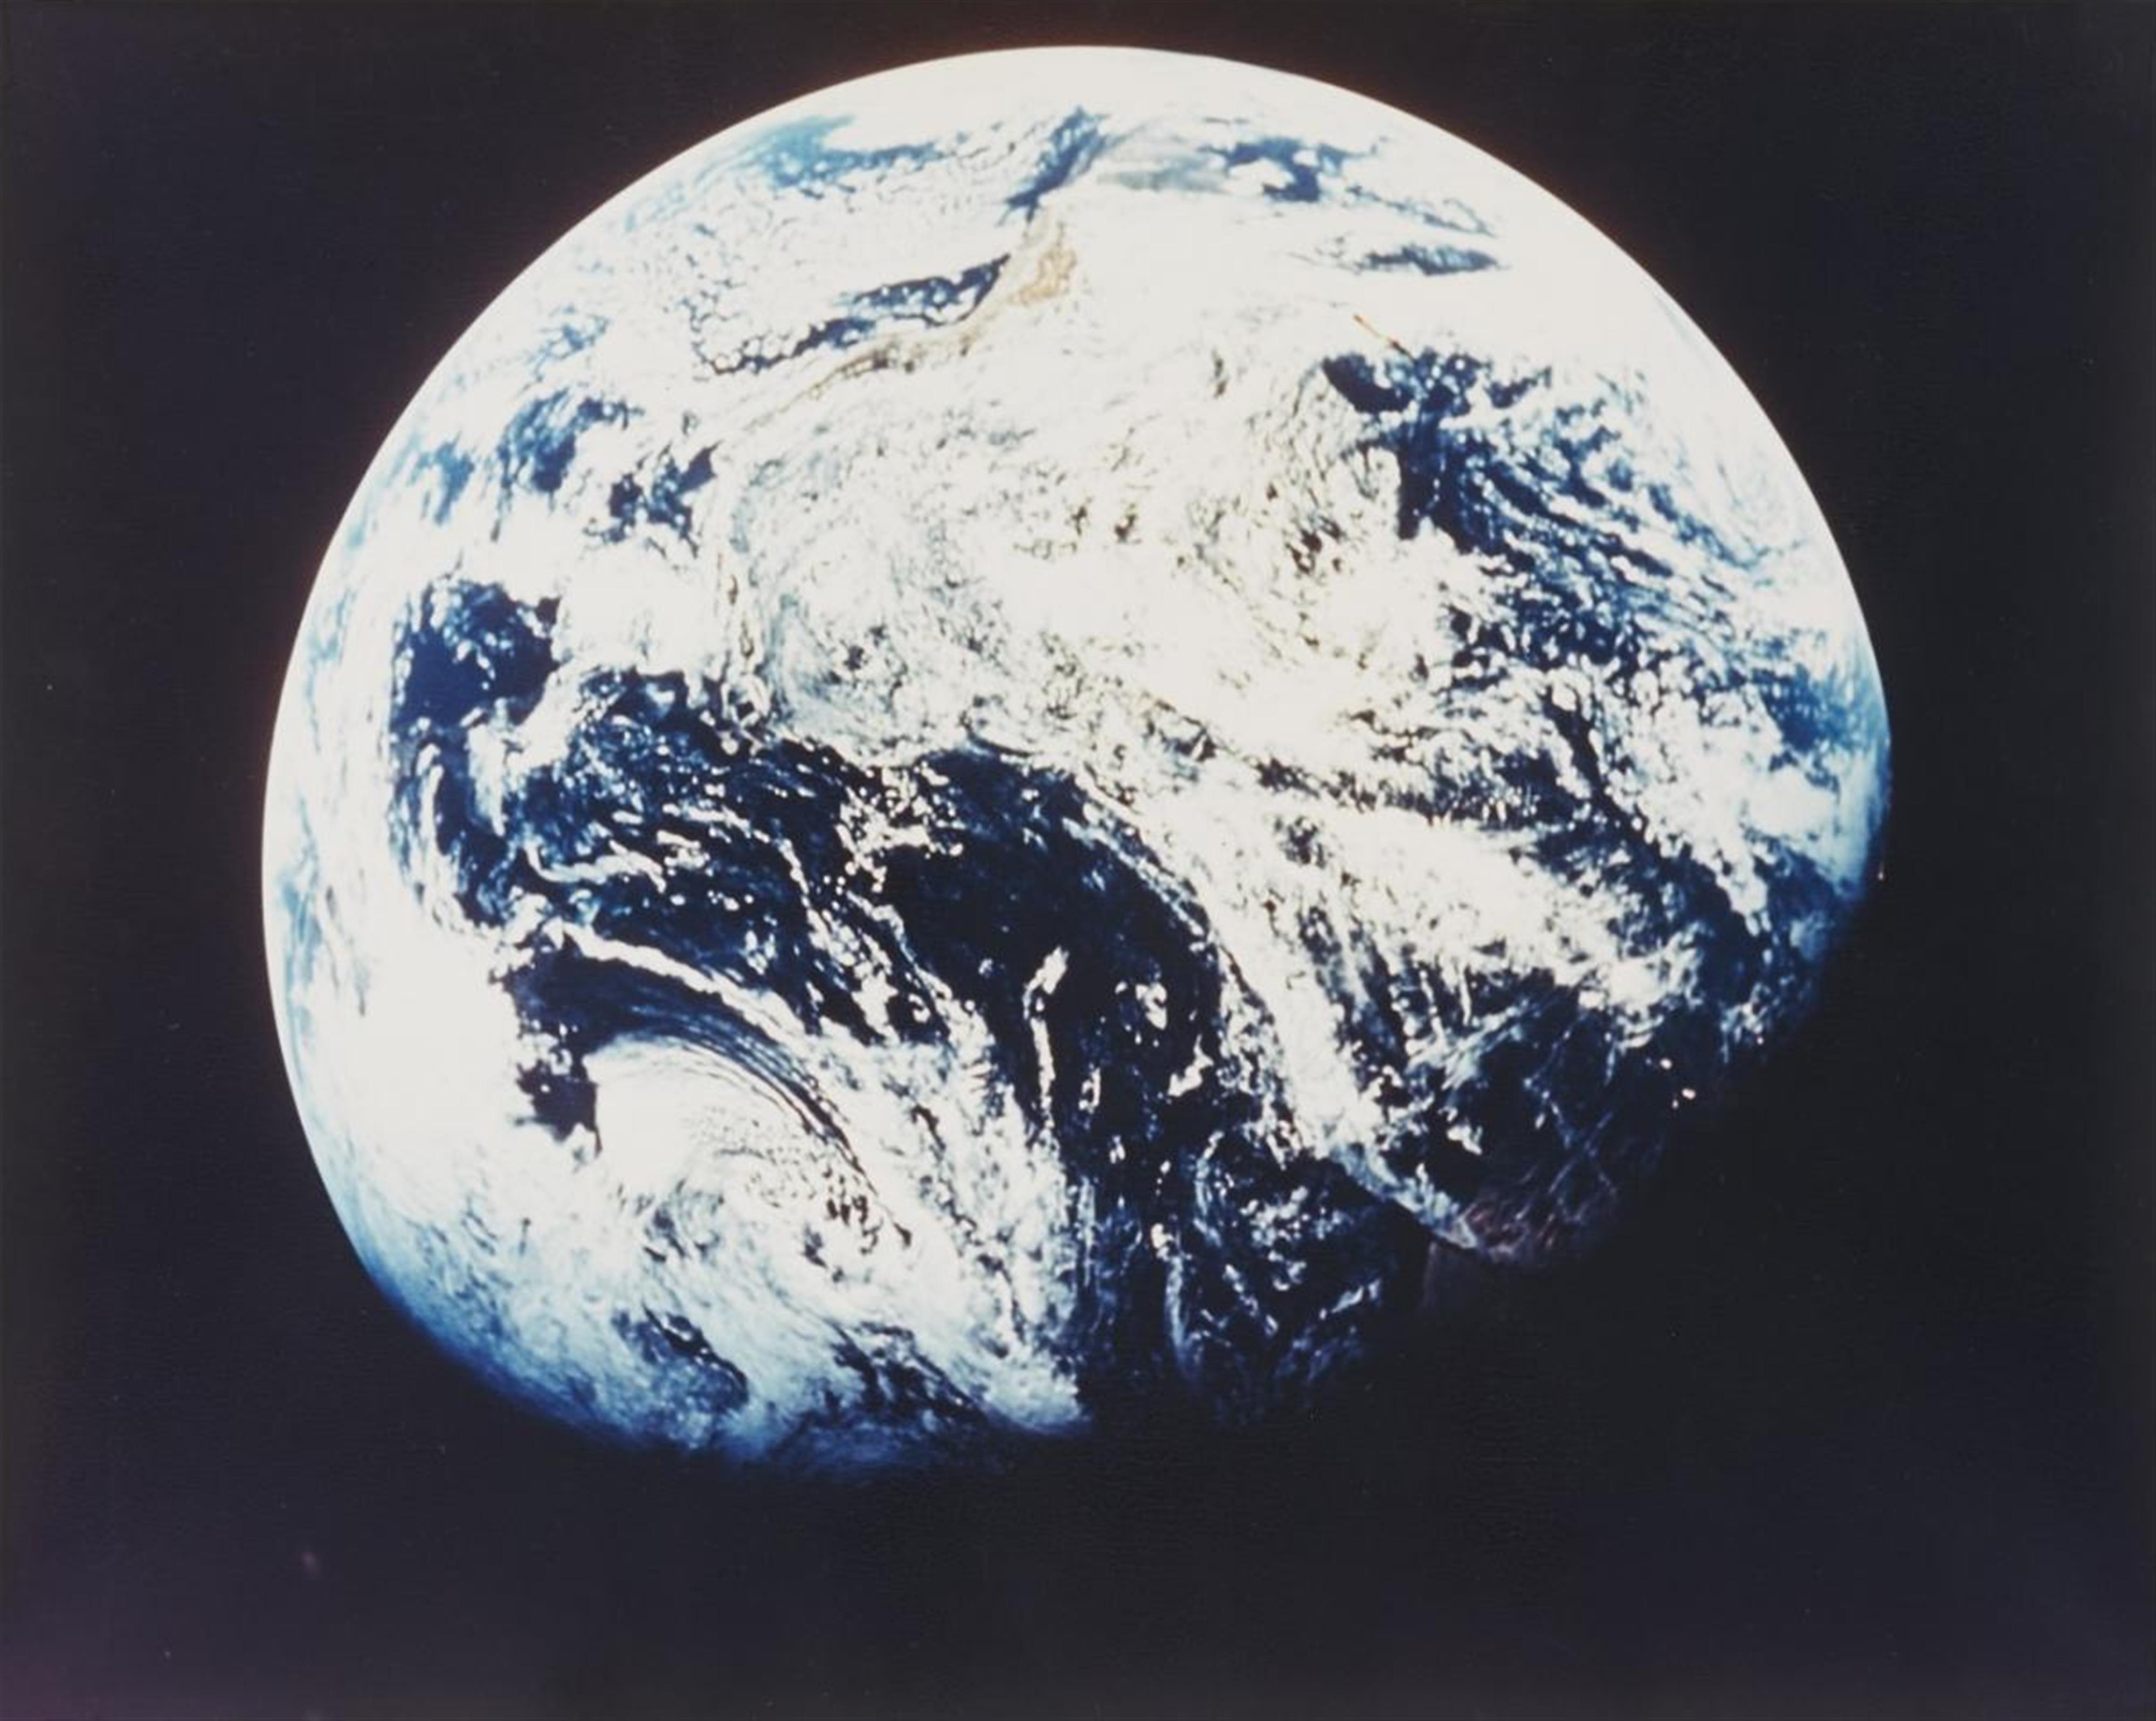 NASA - The first image taken by humans of the whole Earth, Apollo 8 - image-1